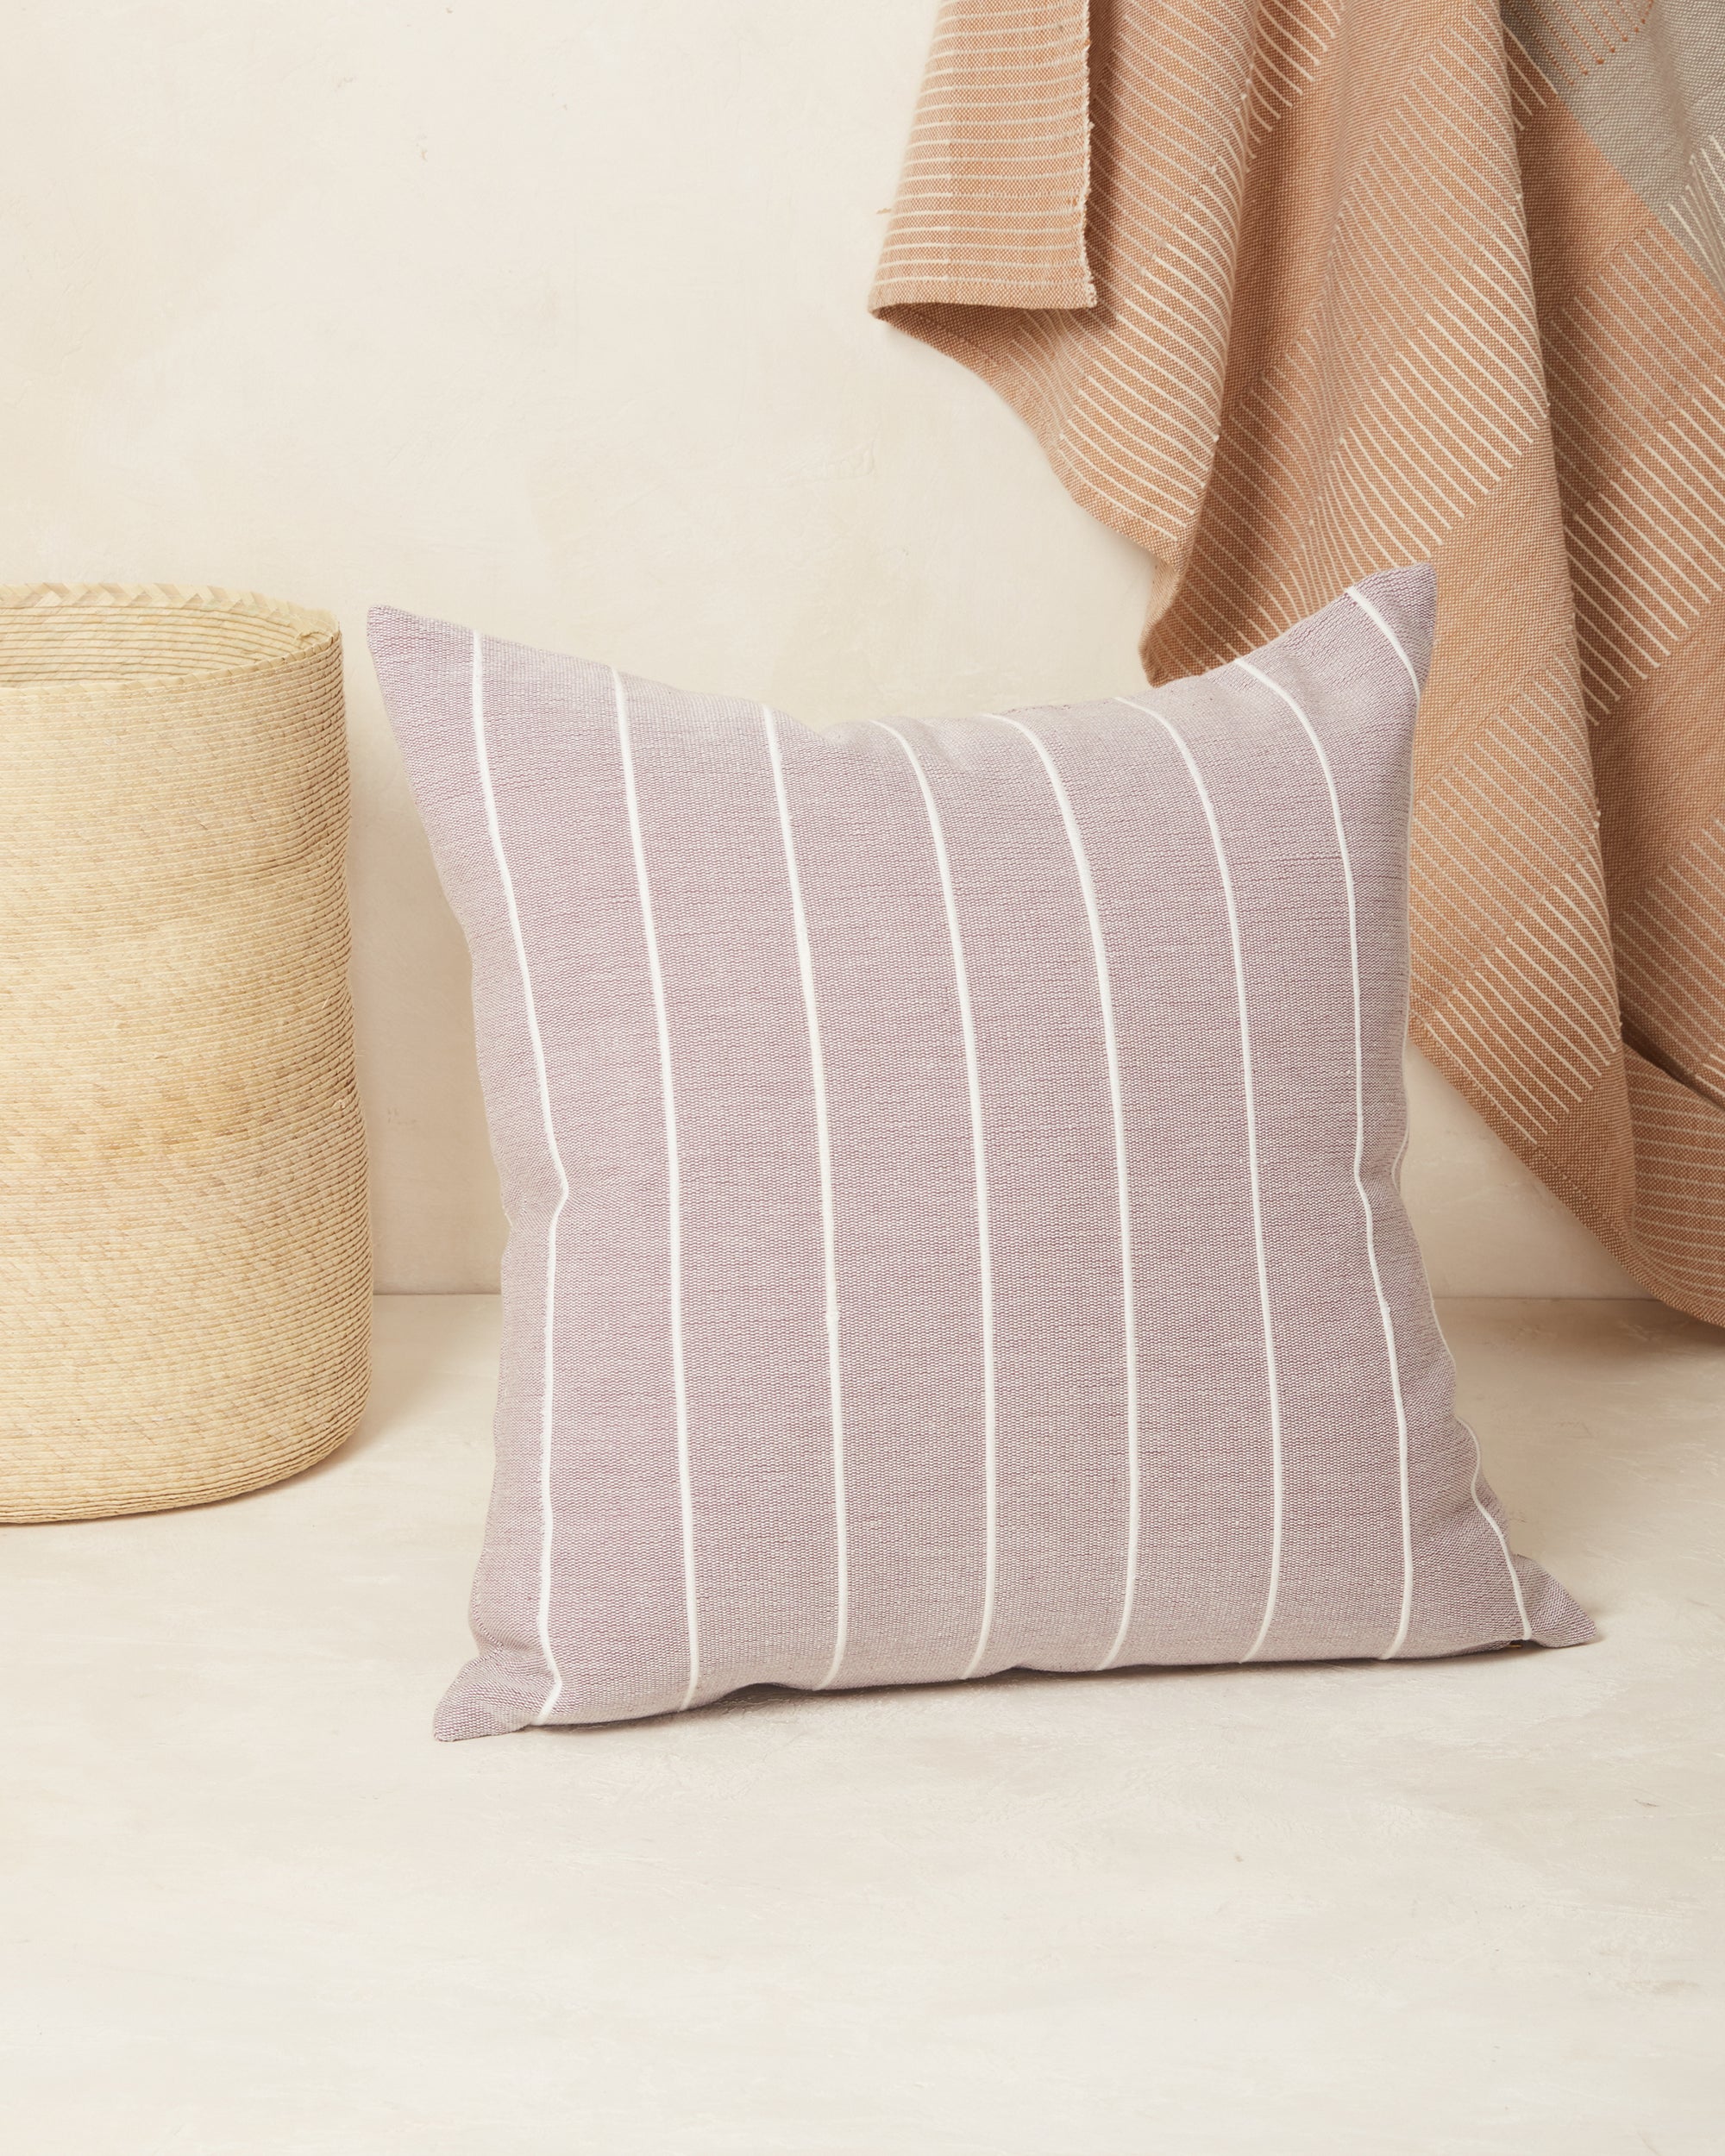 MINNA Ethically handwoven Recycled Stripe Decorative Throw Pillow in Lilac, Lavender, Purple